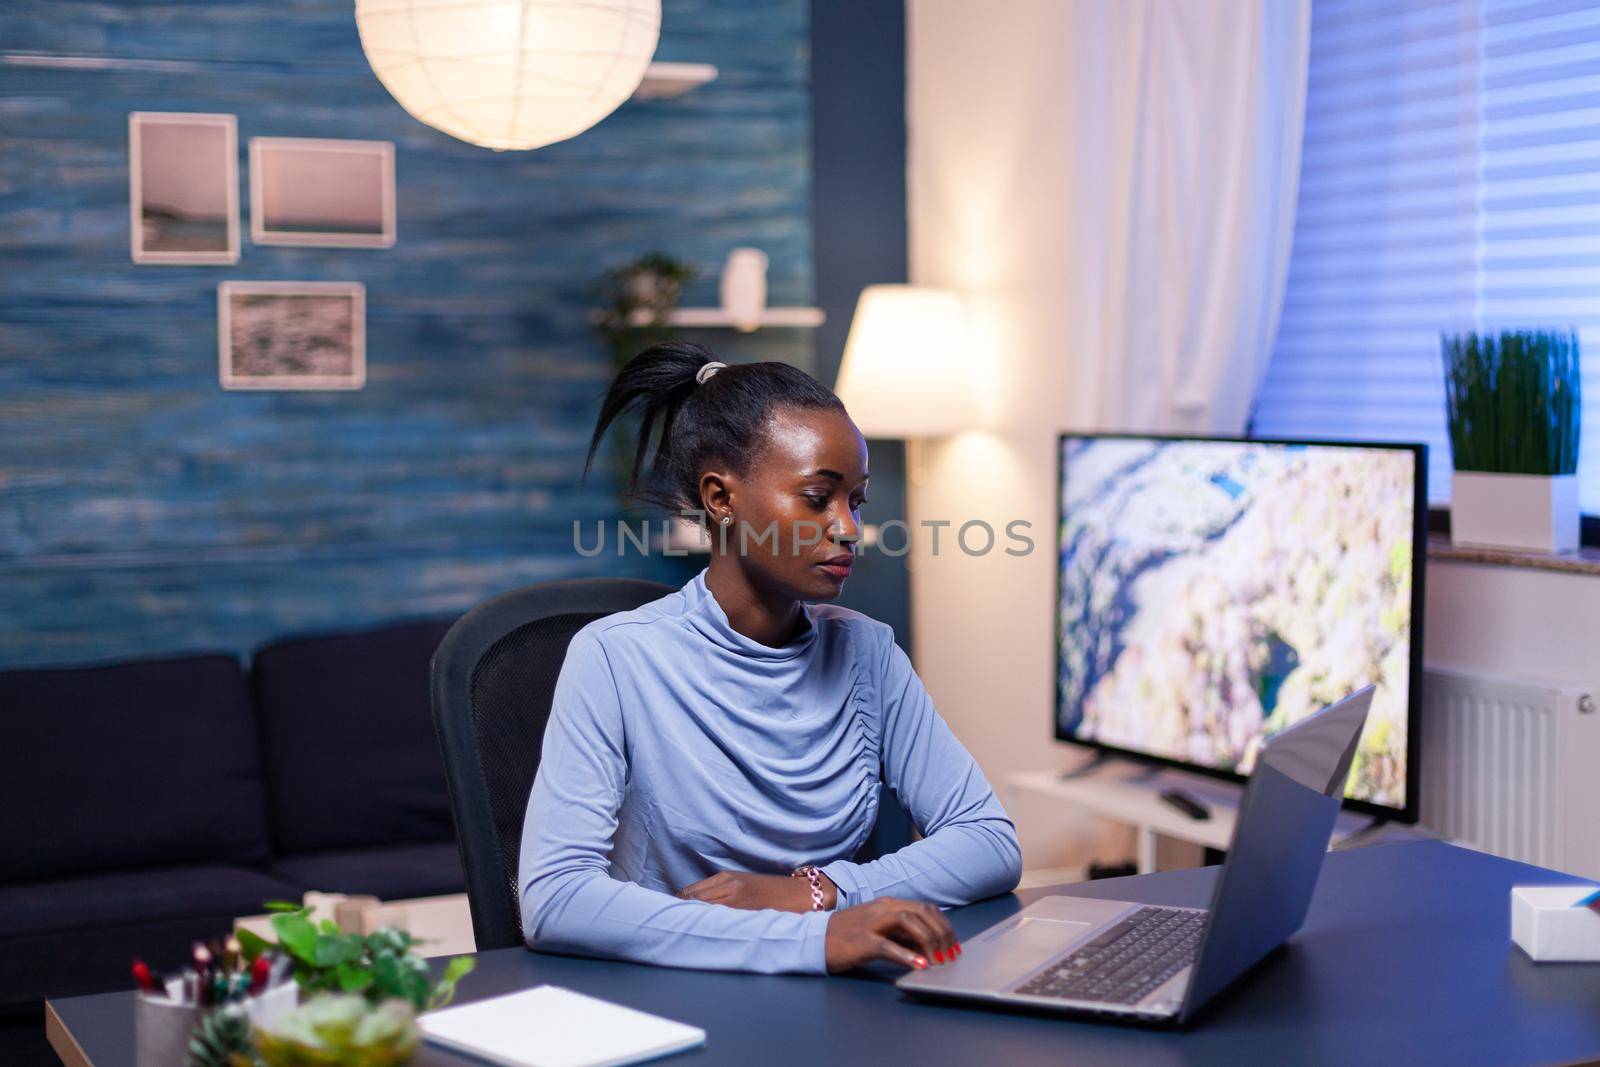 Dark skinned freelancer reading documentation on laptop computer in living room late at night. Black entrepreneur sitting in personal workplace writing on keyboard.